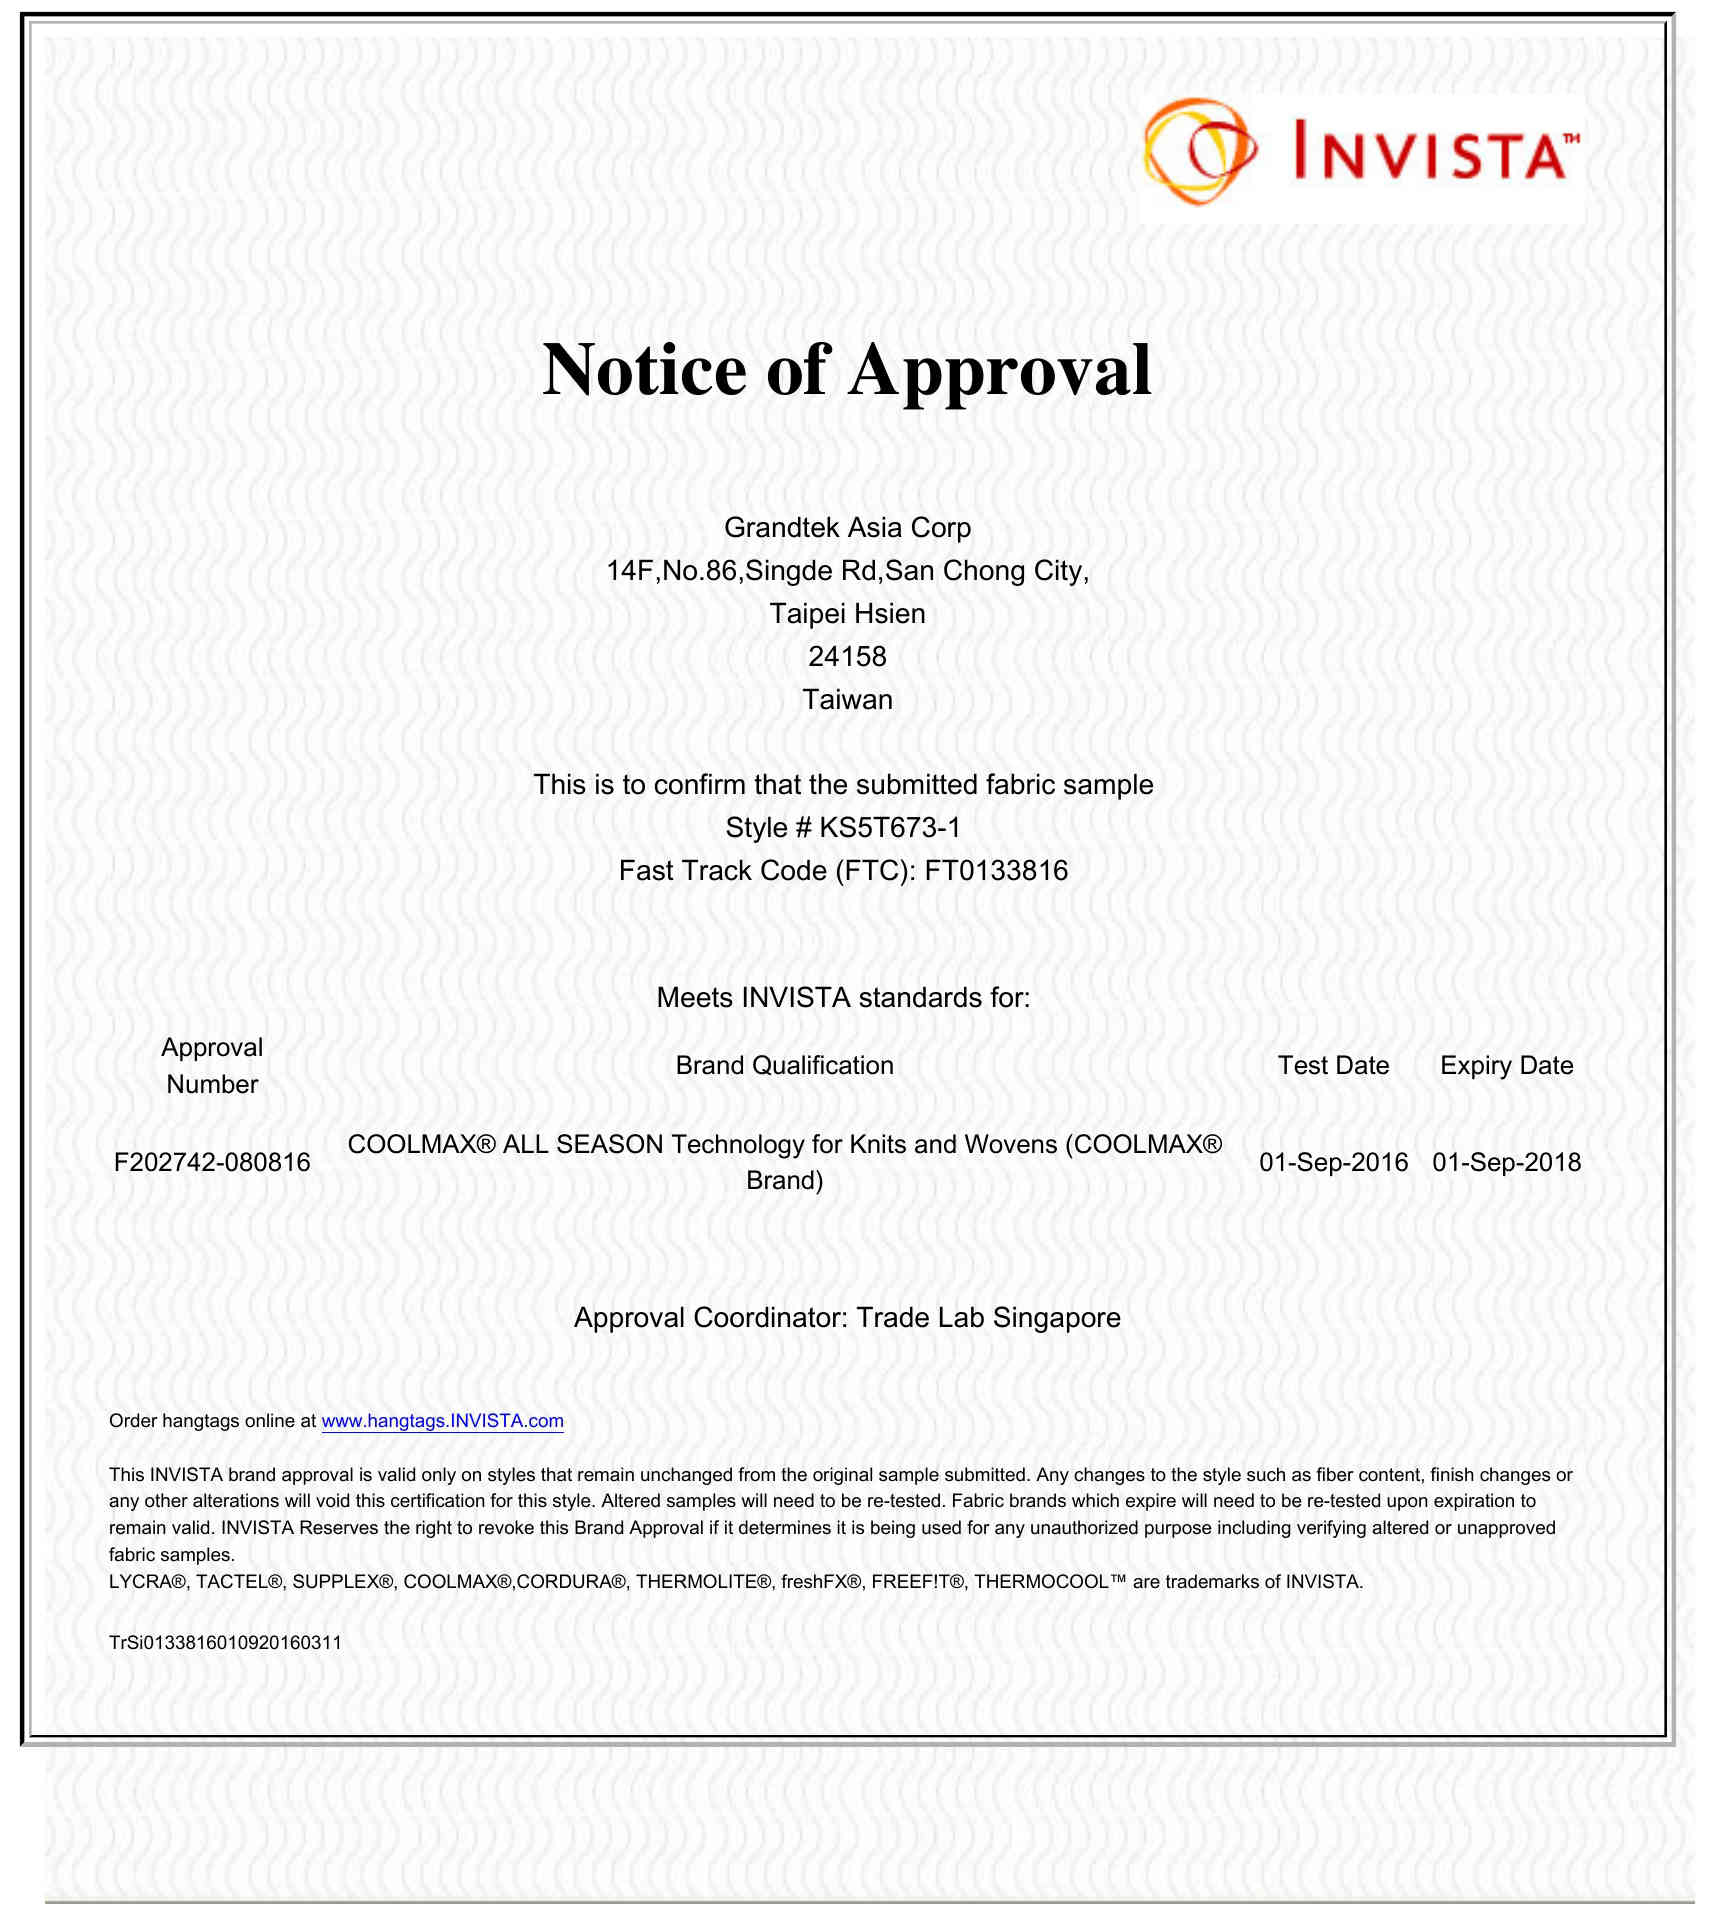 Notice of Approval by INVISTA